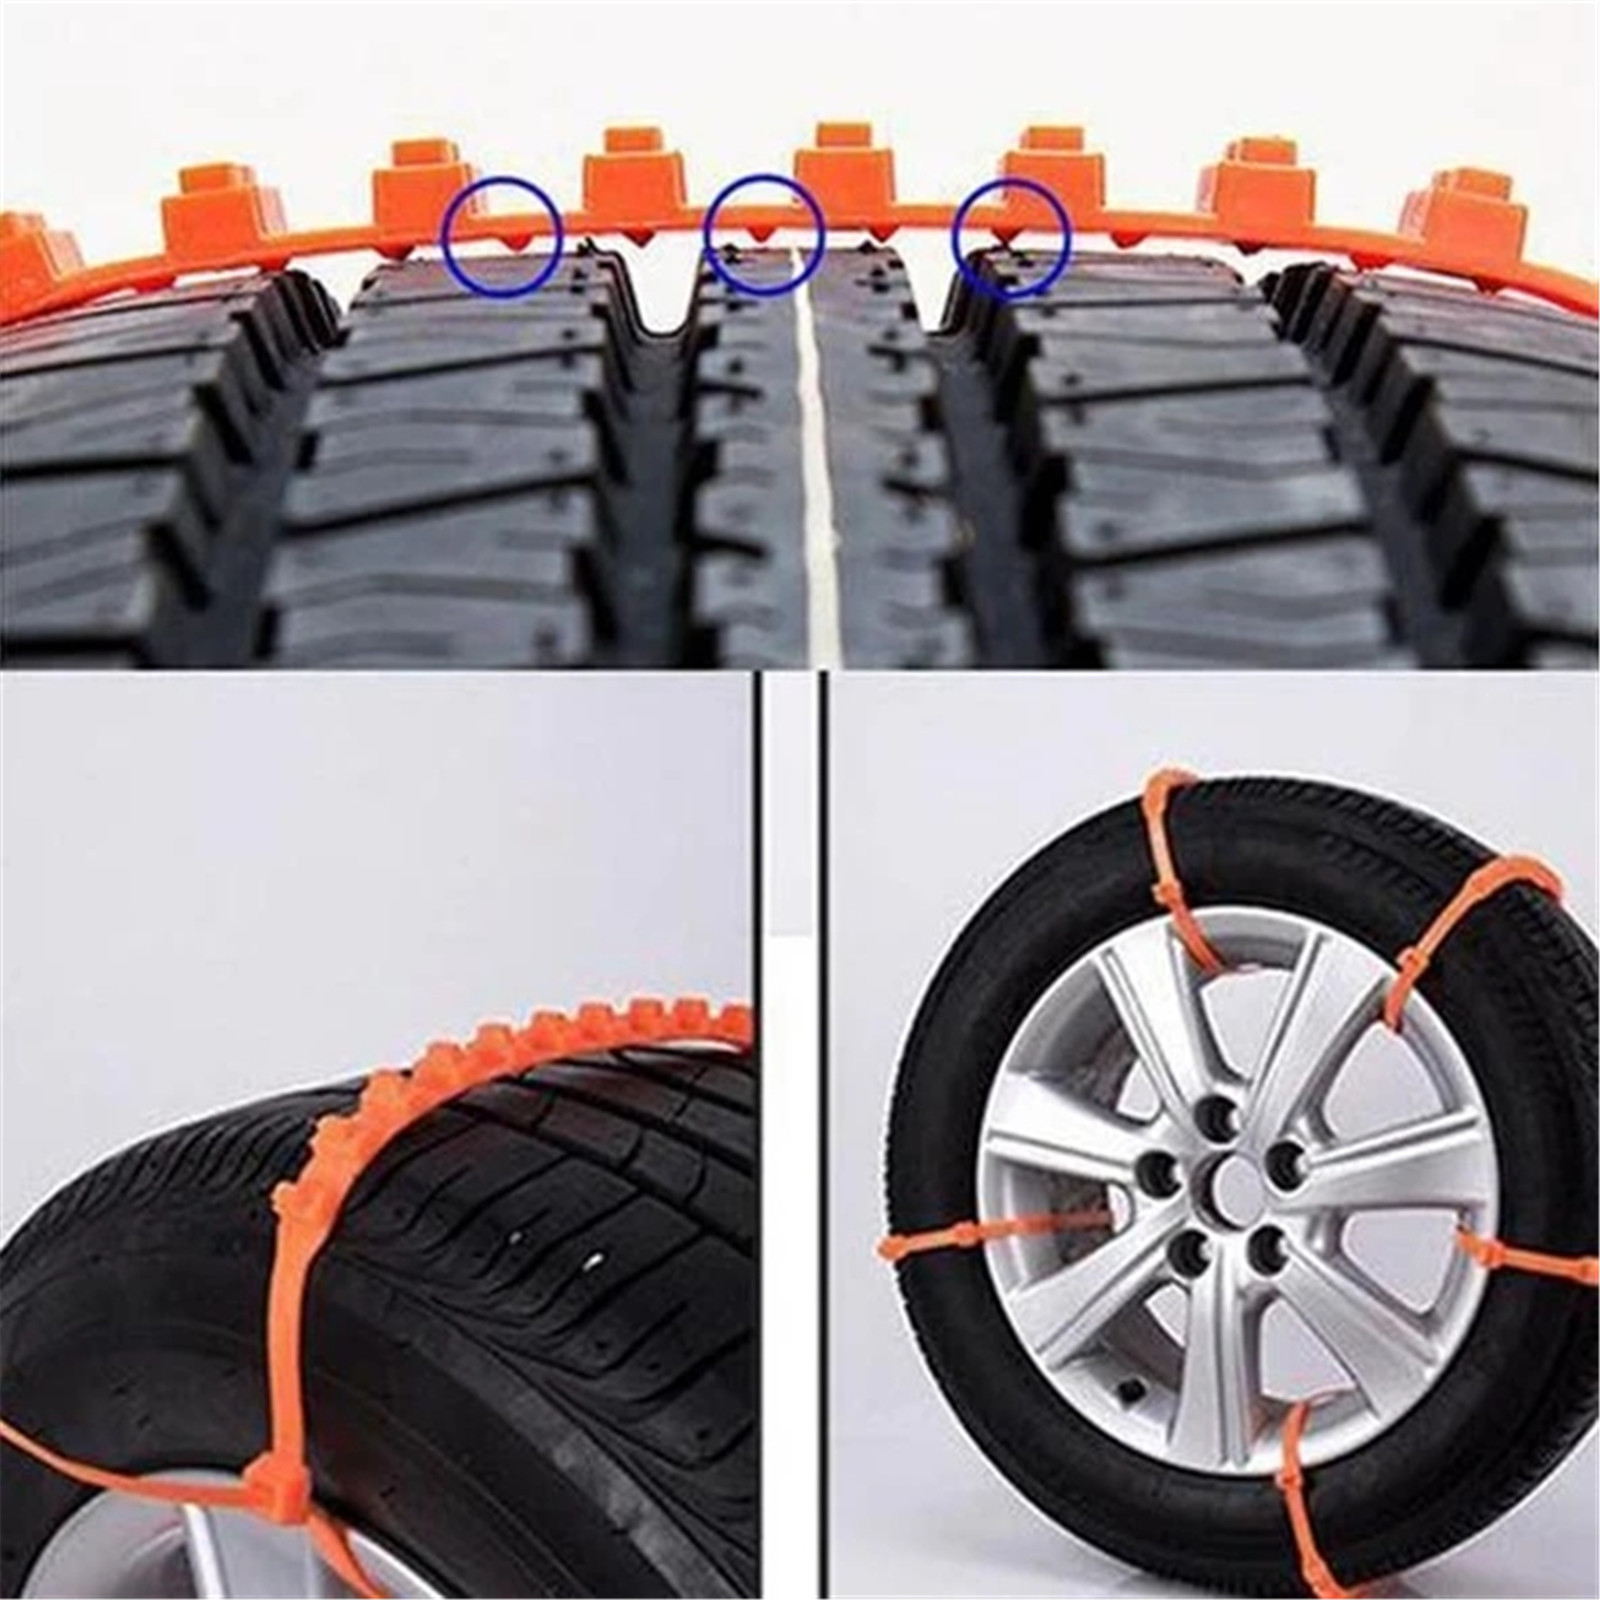 Winter 20Pc Newest 94cm Car Universal Anti-skid Snow Chains Nylon For Car Truck Snow Mud Wheel Tyre Tire Cable Ties Dropshippinp